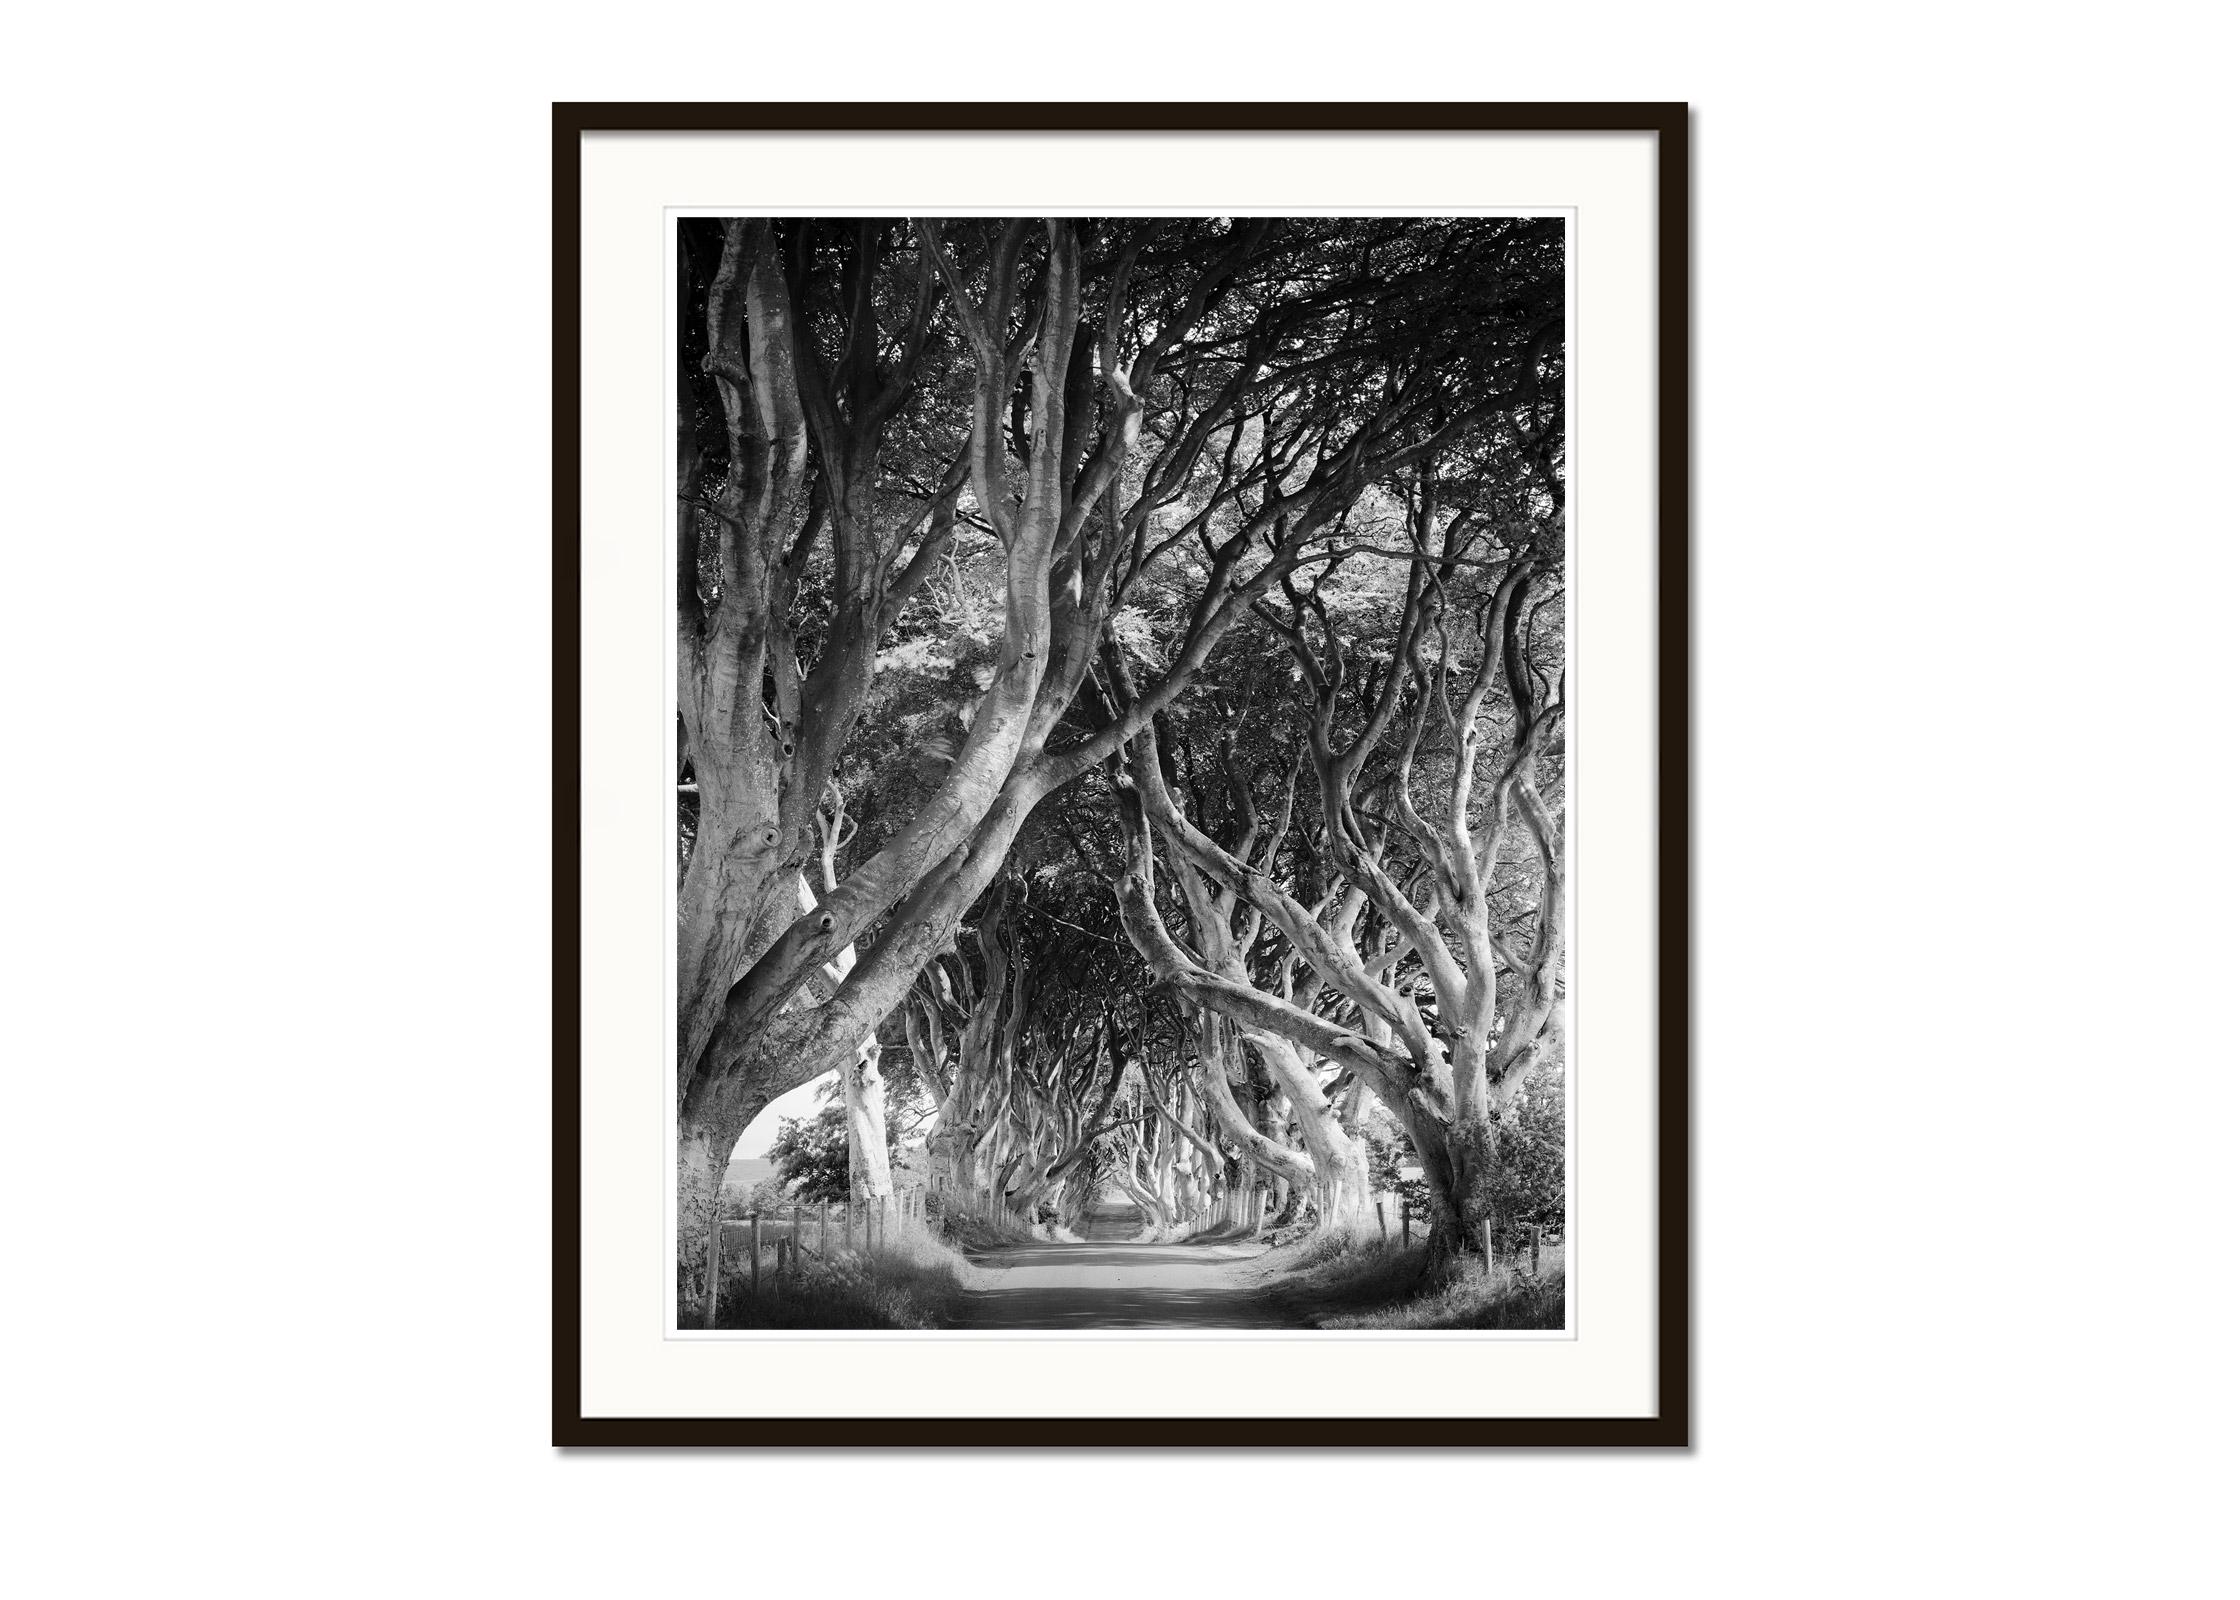 Dark Hedges, tree avenue, mystical forest, black & white photography, landscape - Contemporary Photograph by Gerald Berghammer